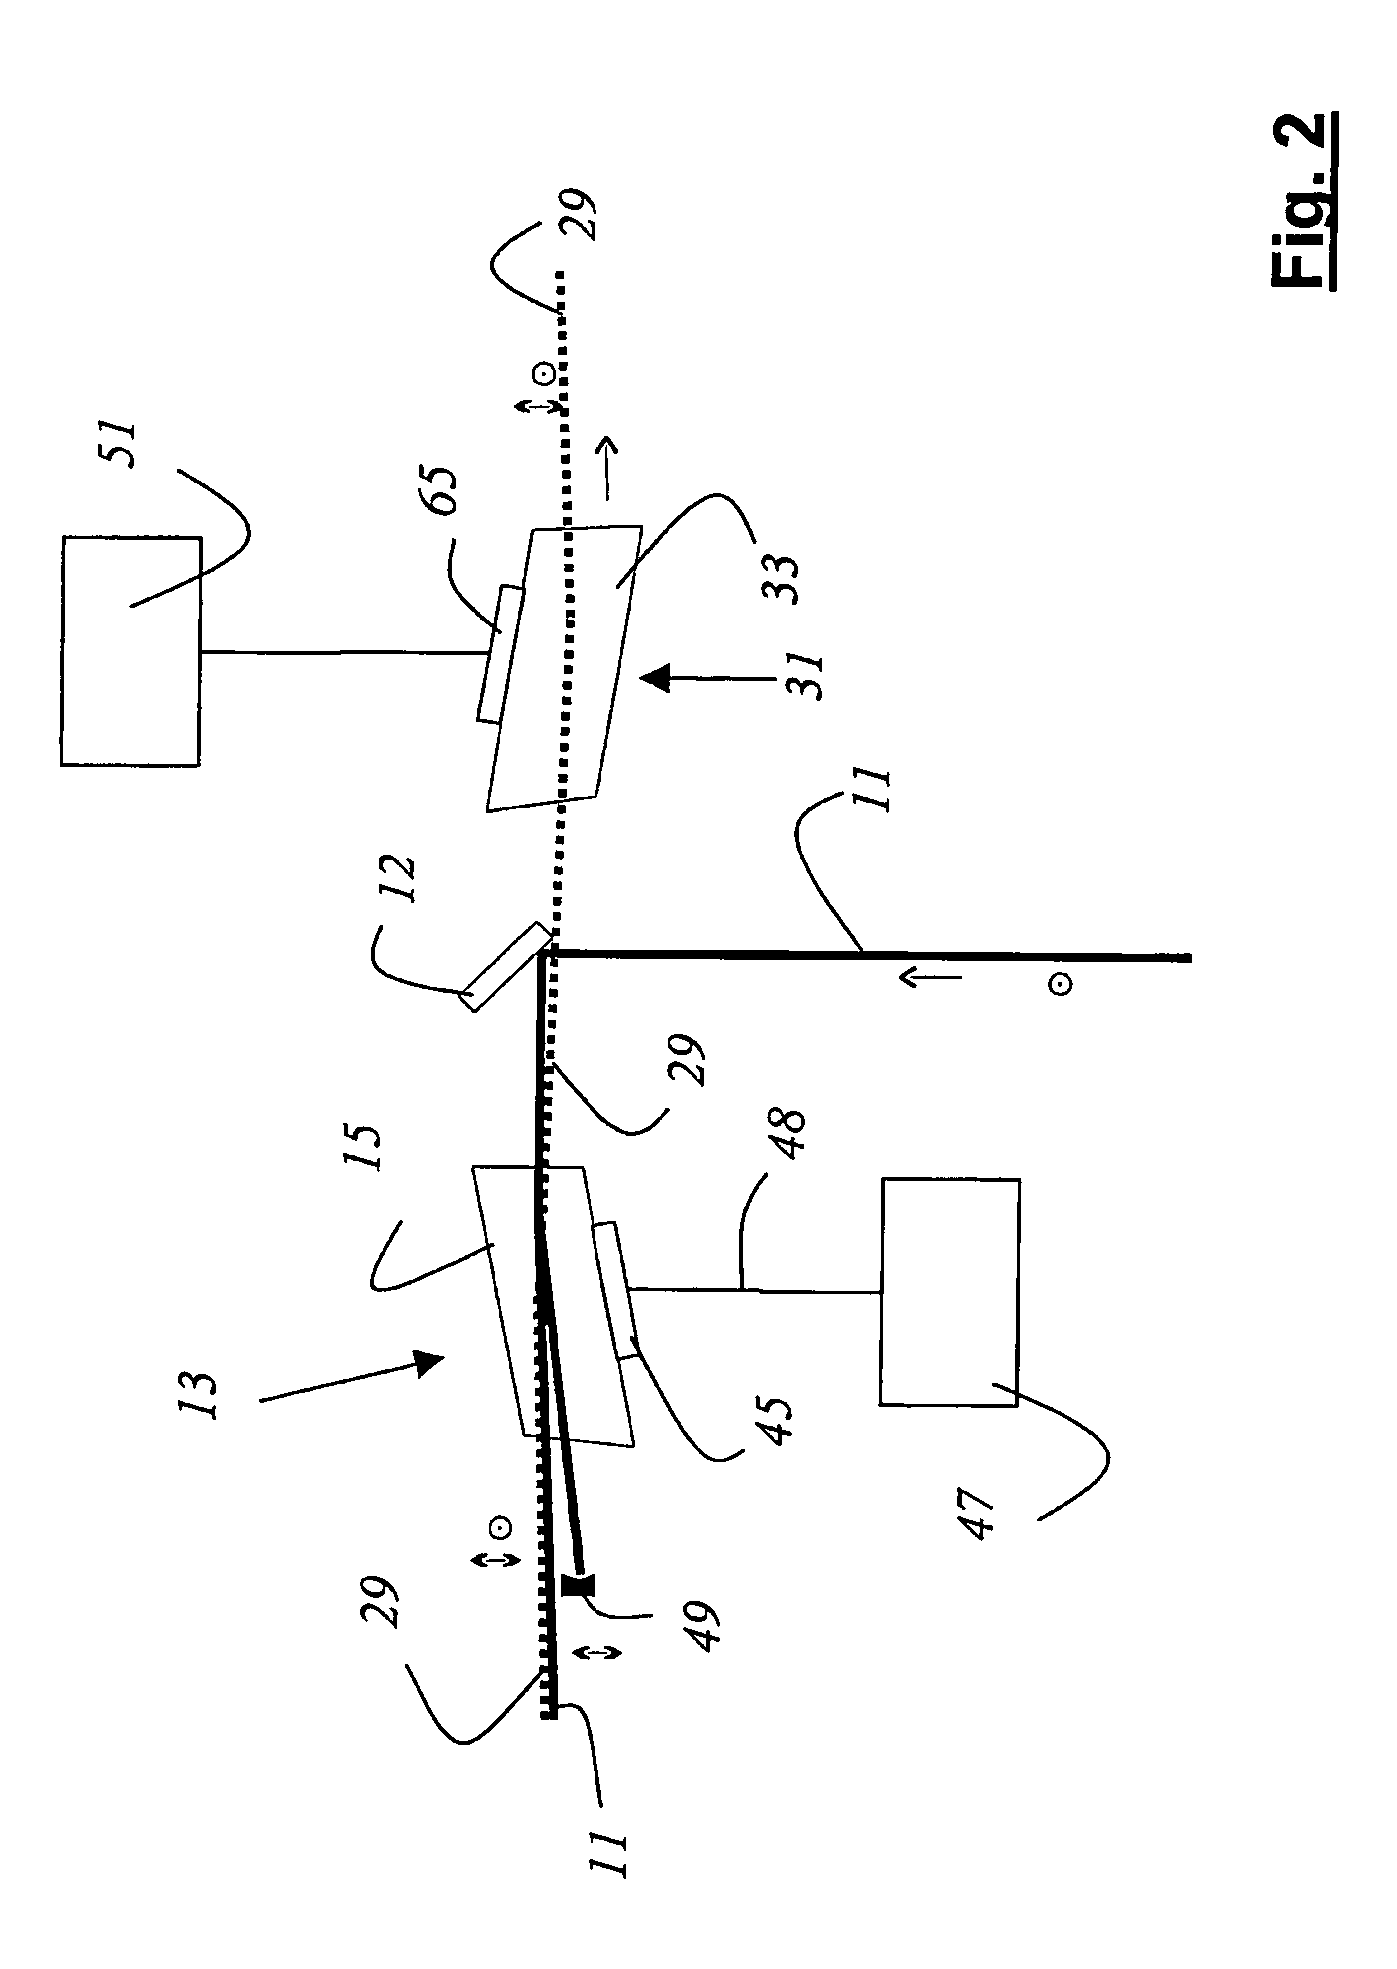 Optical arrangement and scan microscope